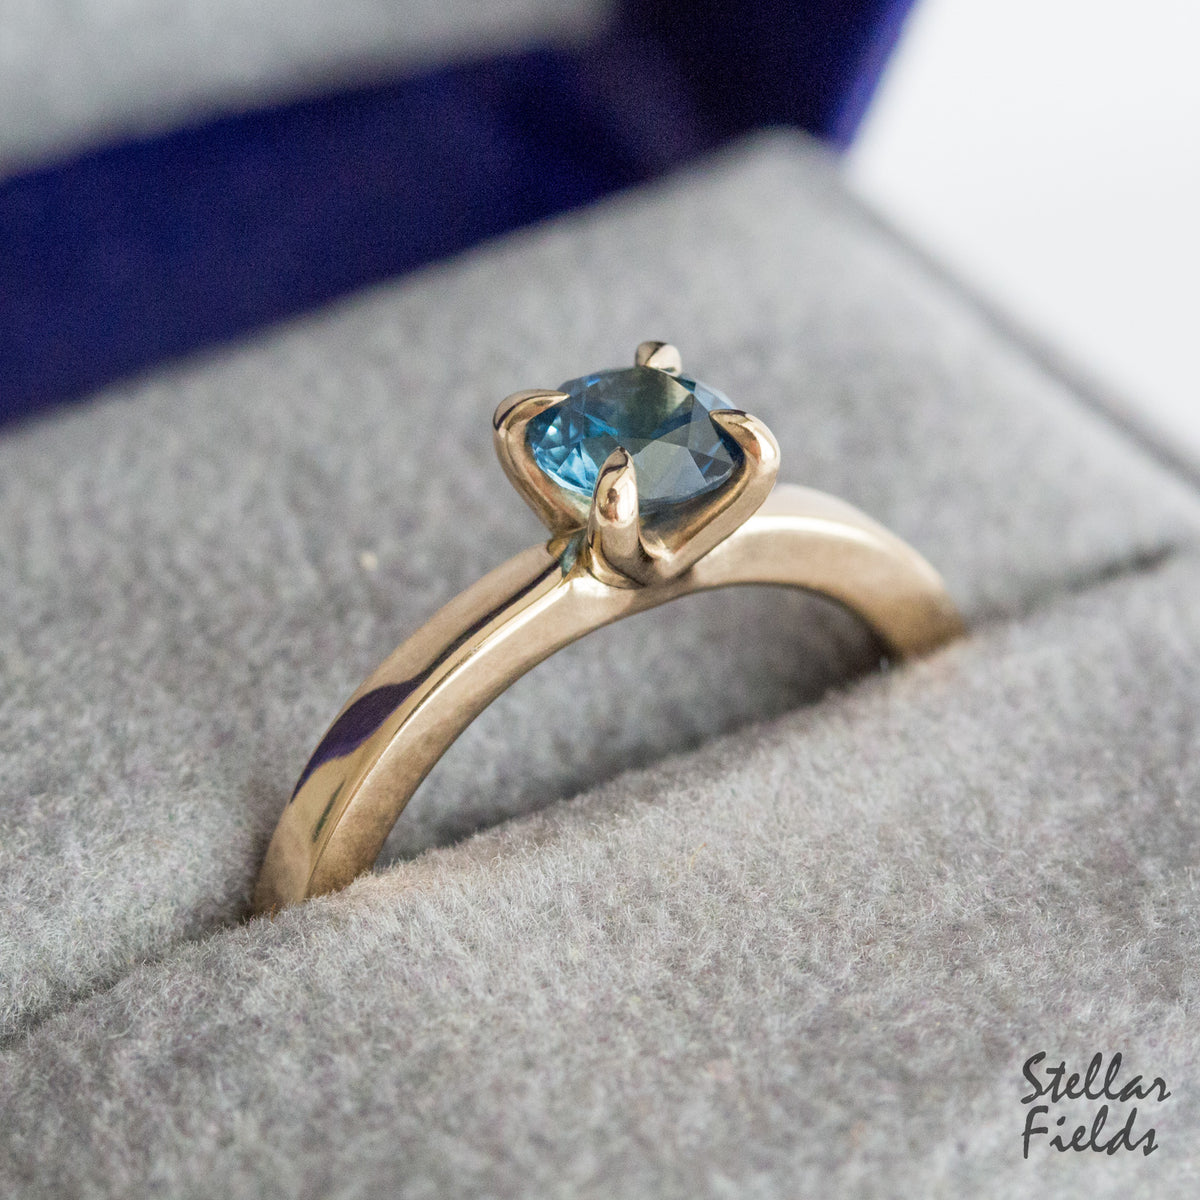 Teal Blue Montana Sapphire prong engagement ring solitaire ring 14k gold Stellar Fields Jewelry